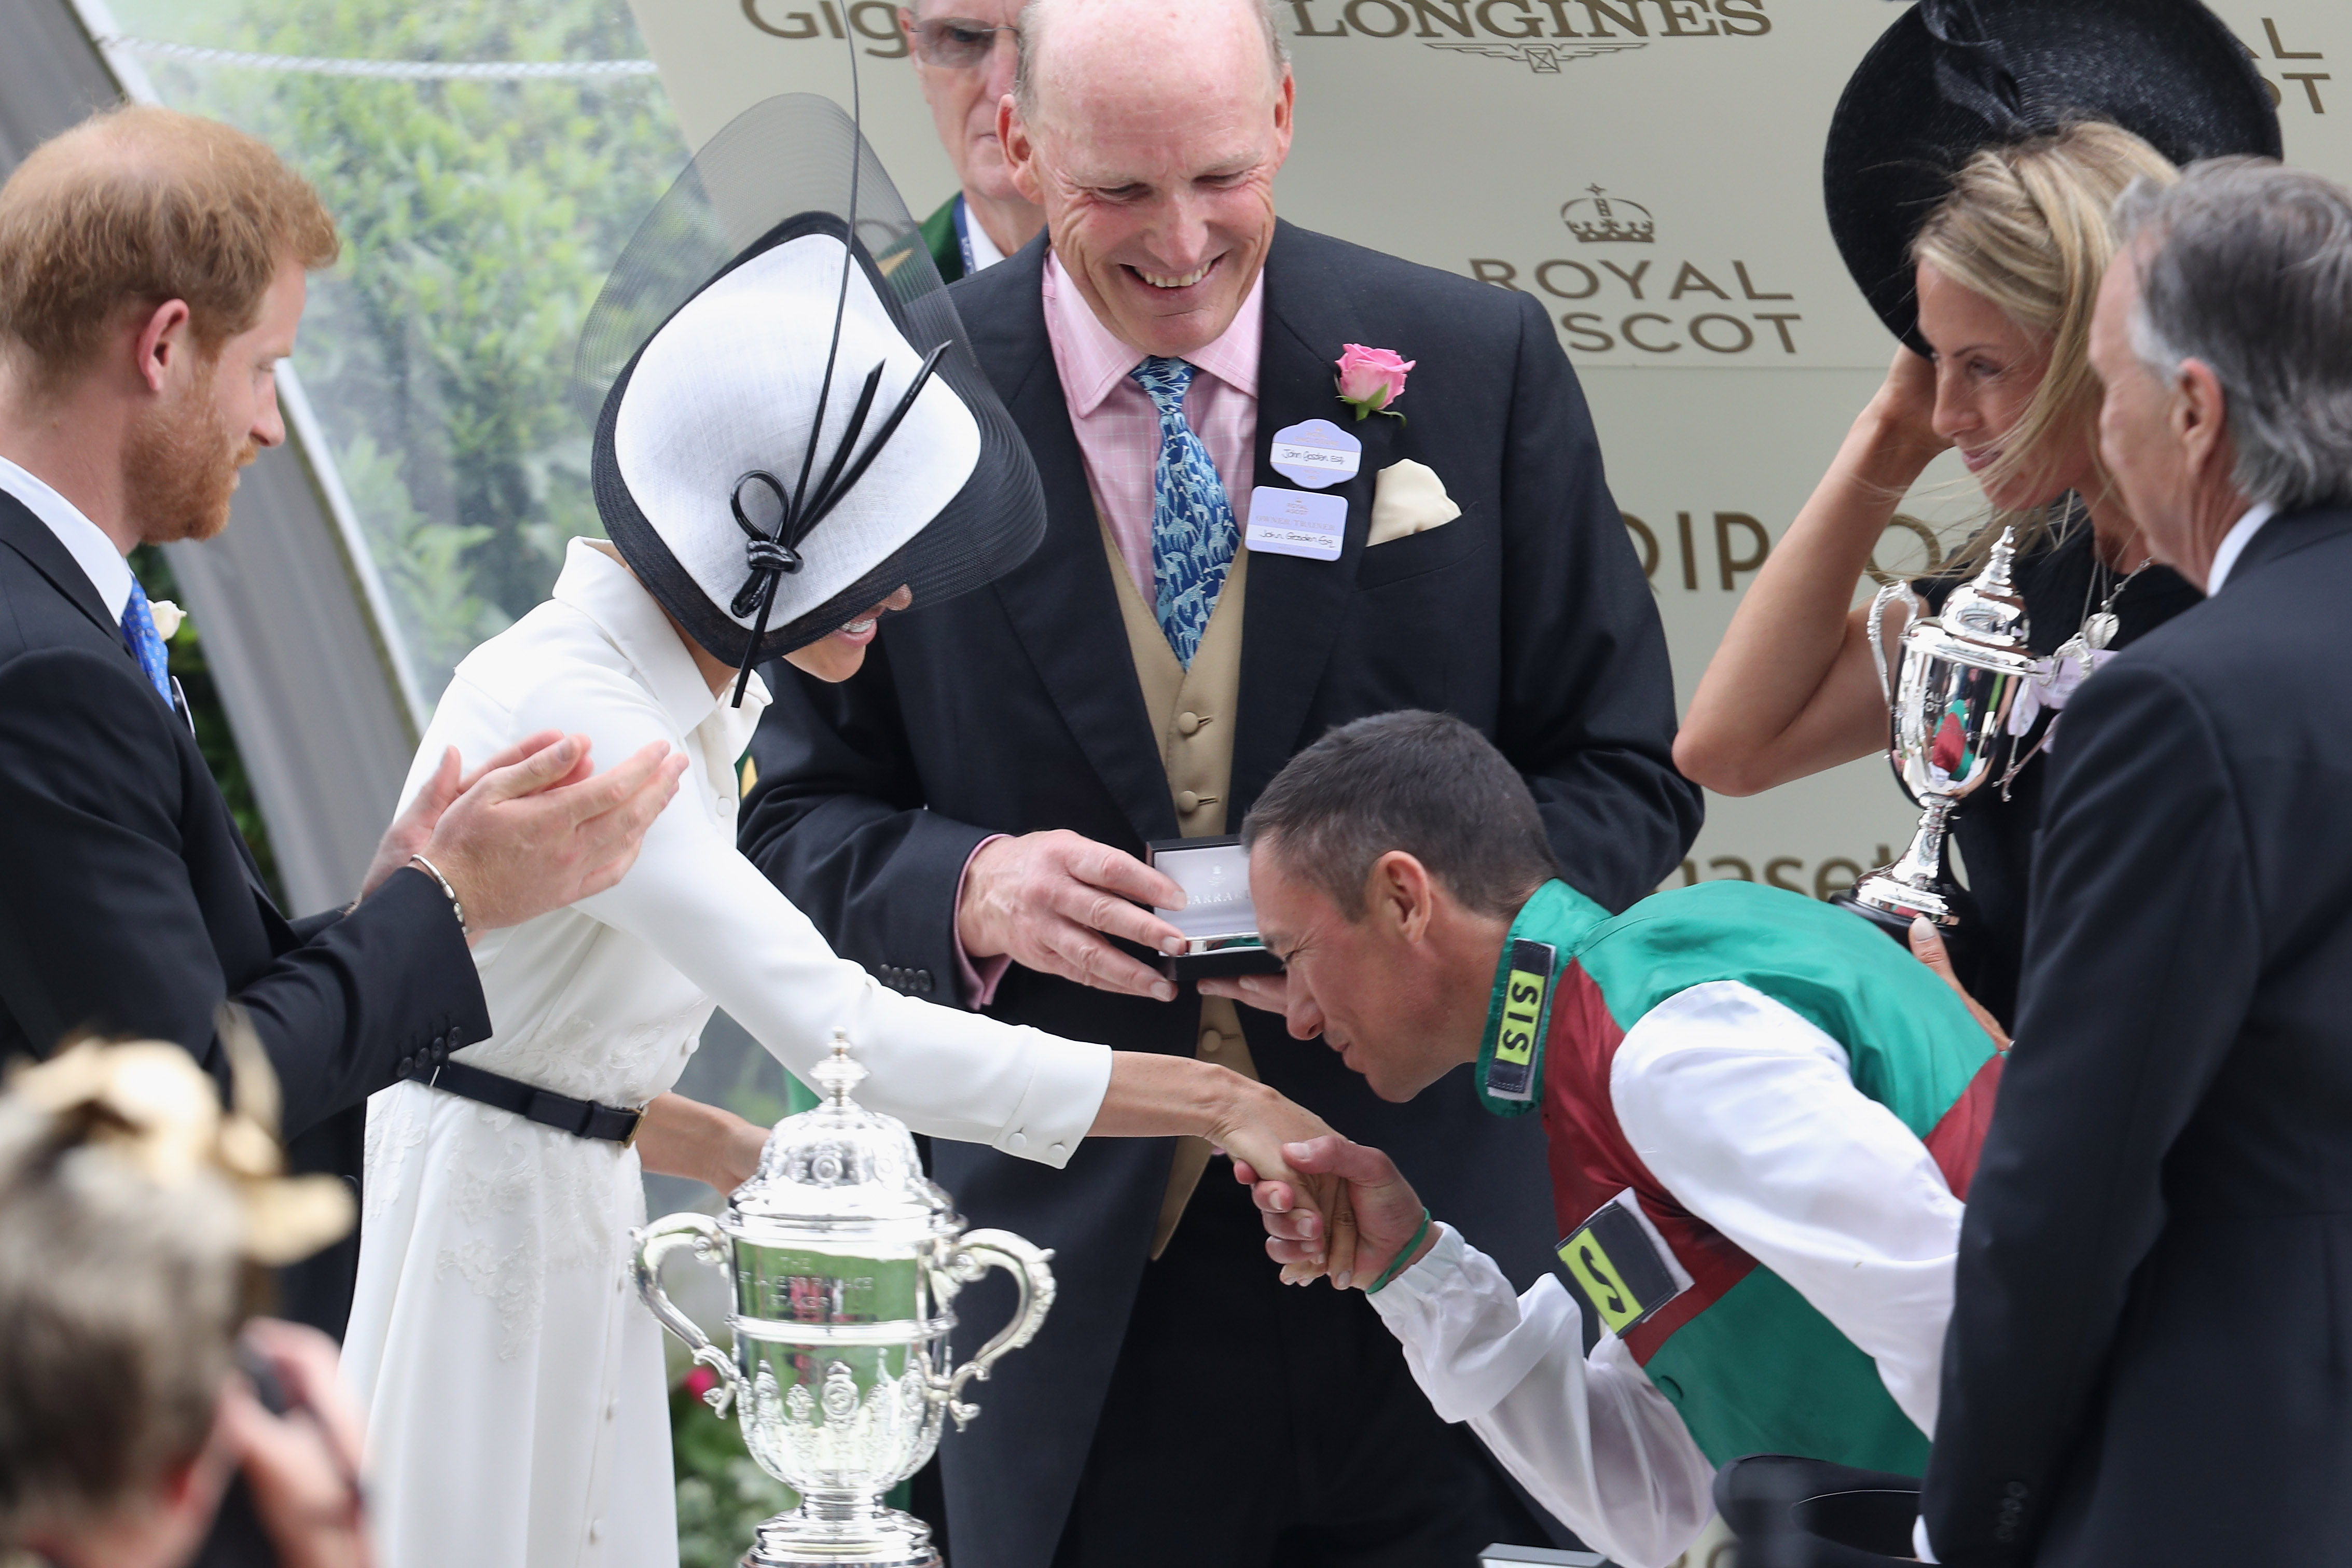 Meghan, Duchess of Sussex receives a kiss from Jockey Frankie Dettori as she and Prince Harry, Duke of Sussex present him with the trophy for winning the St James's Palace Stakes on Without Parole during Royal Ascot Day 1. (Chris Jackson—Getty Images)